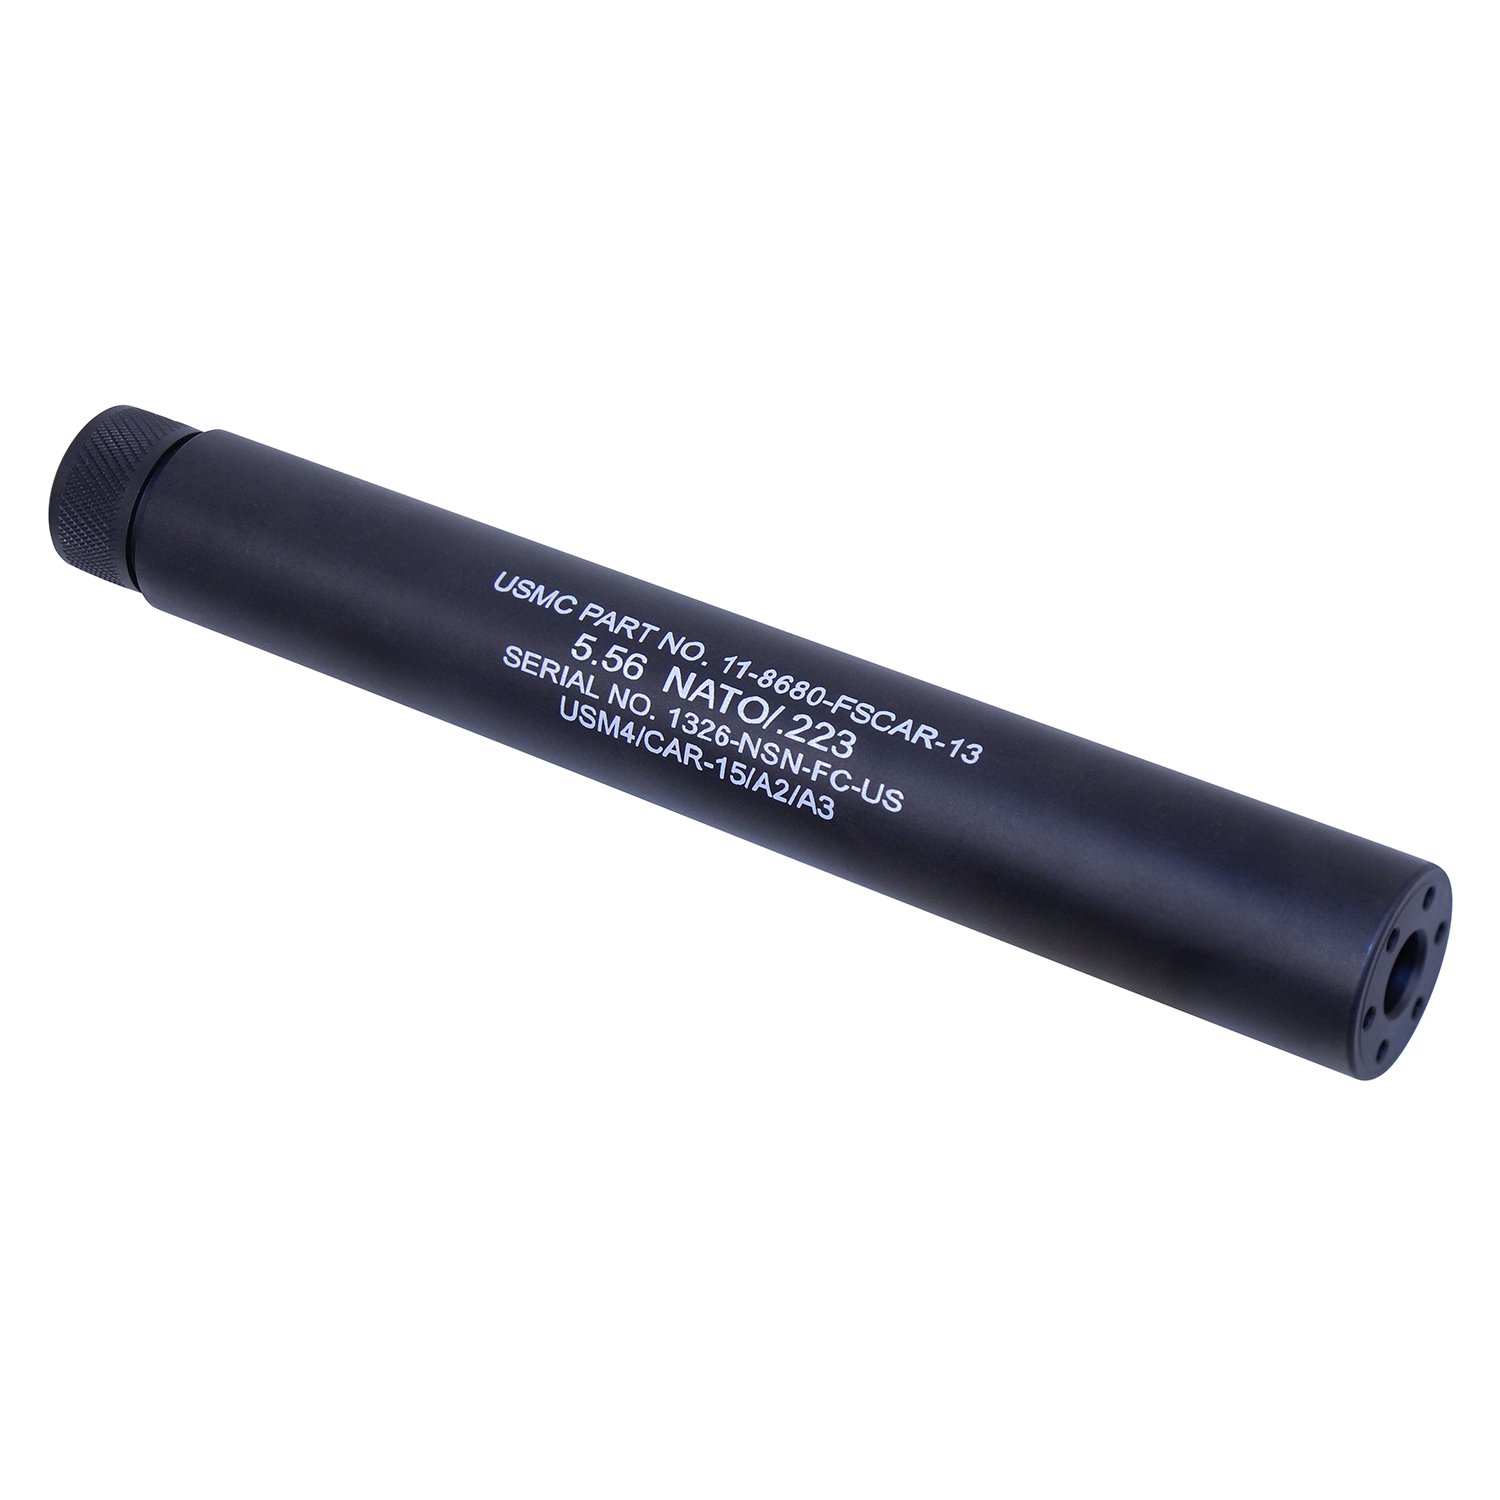 AR-15 black 9-inch mock suppressor with detailed laser engravings, ideal for gun enthusiasts.